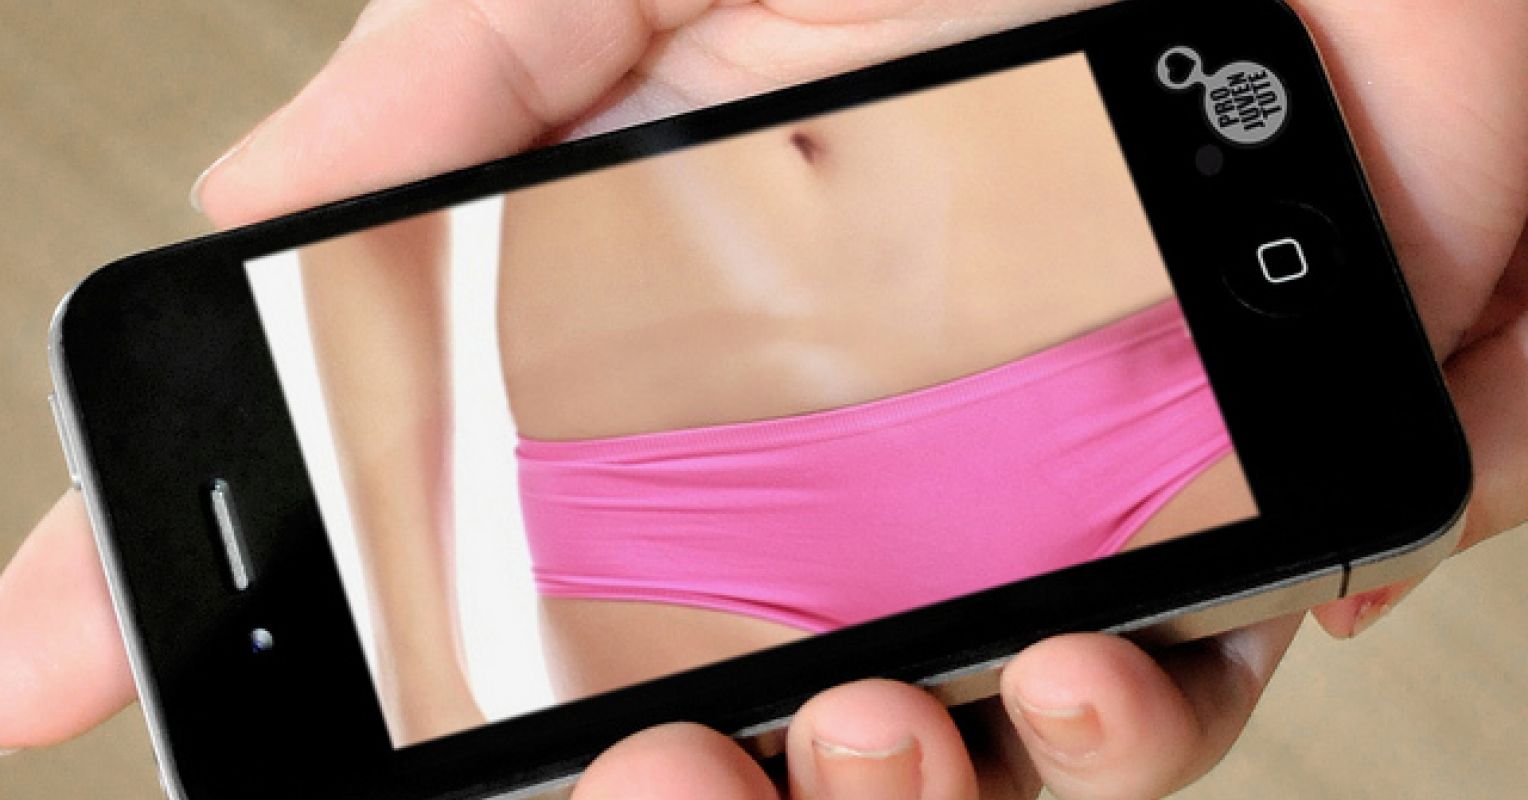 Teen Sexting in Perspective | Psychology Today United Kingdom